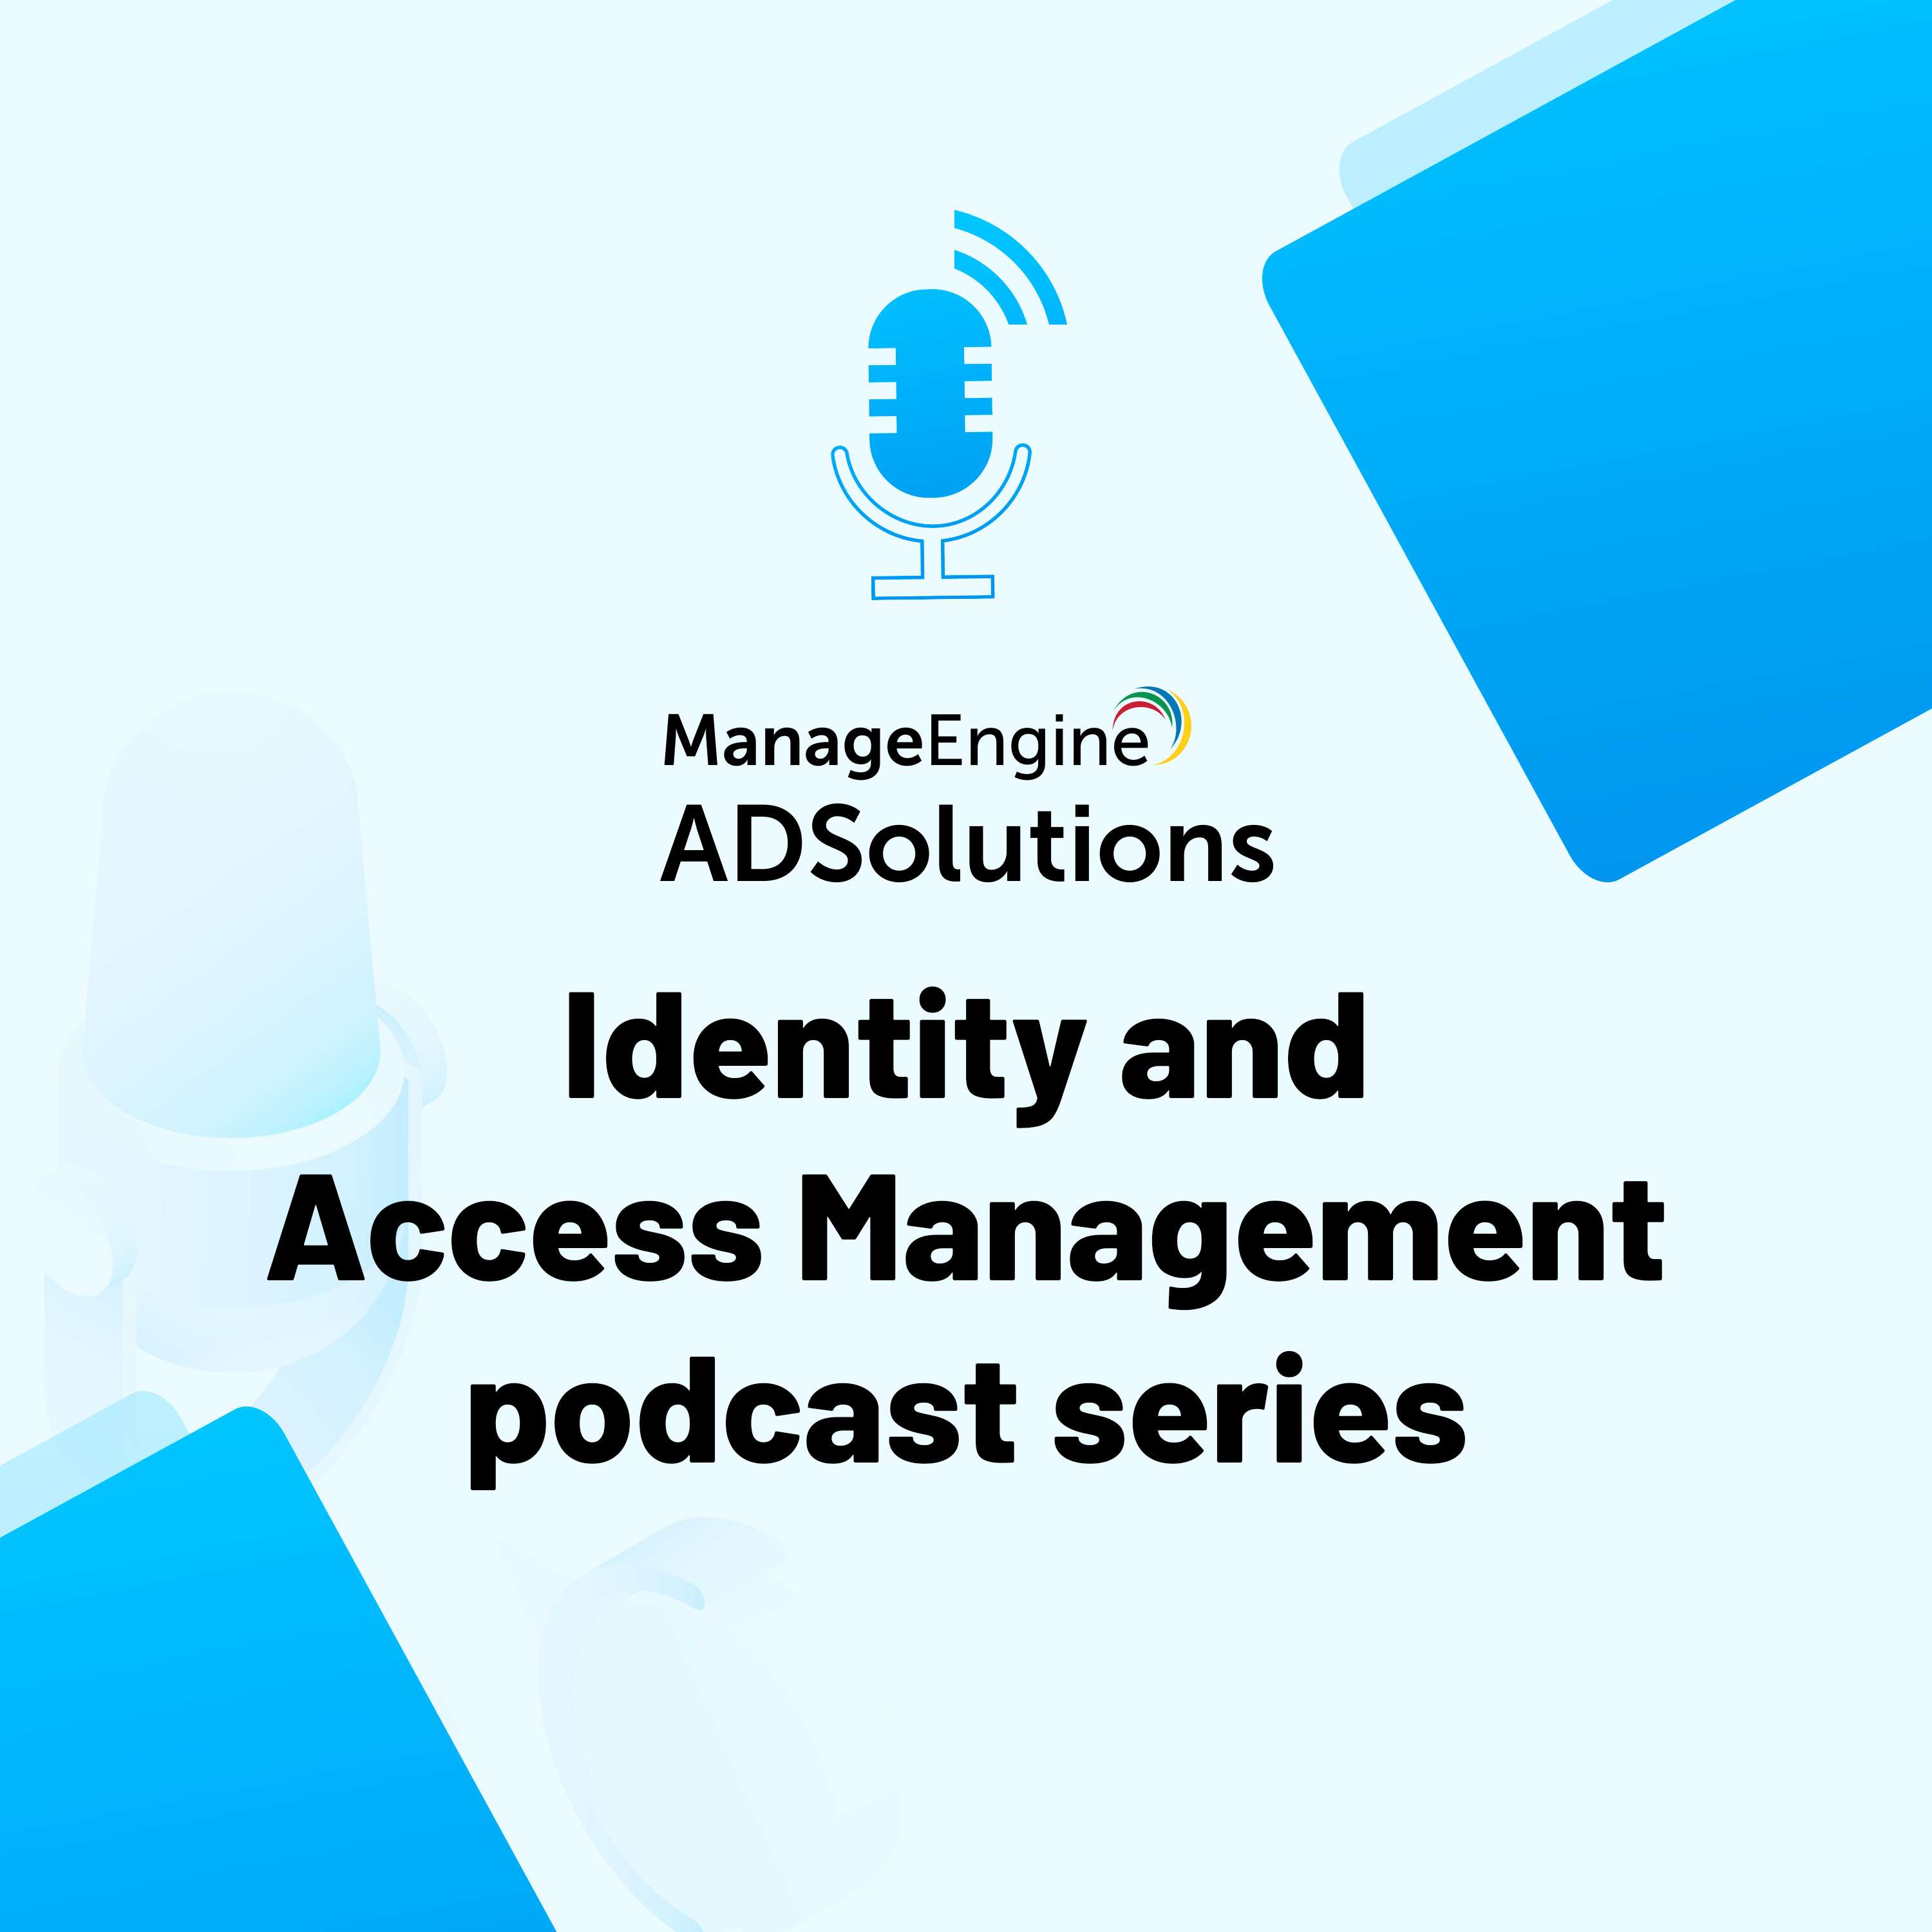 ManageEngine’s Identity and Access Management Podcast series